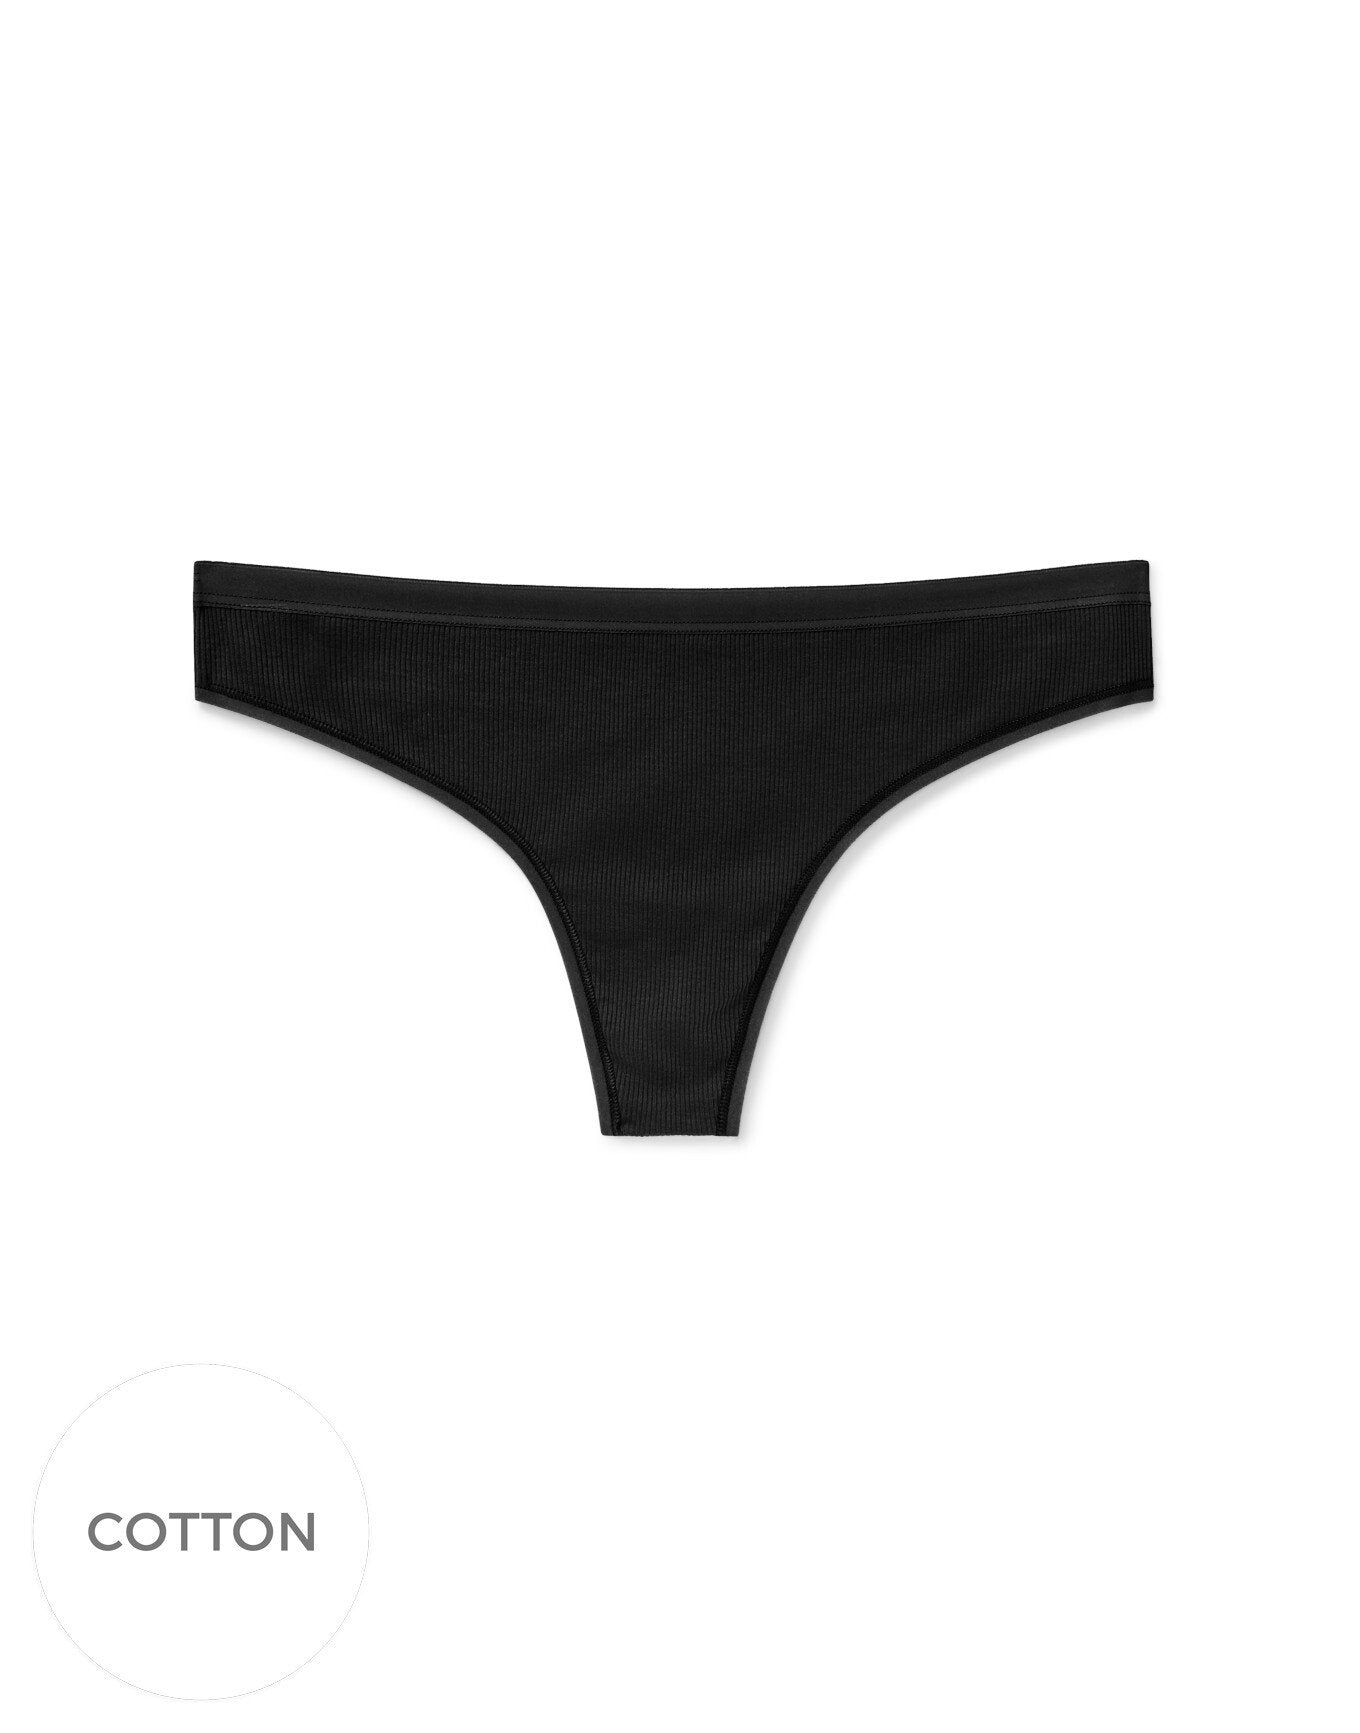 Adore Me Alexandra Ribbed Cotton Thong in color PureBlack 2ZUO and shape thong